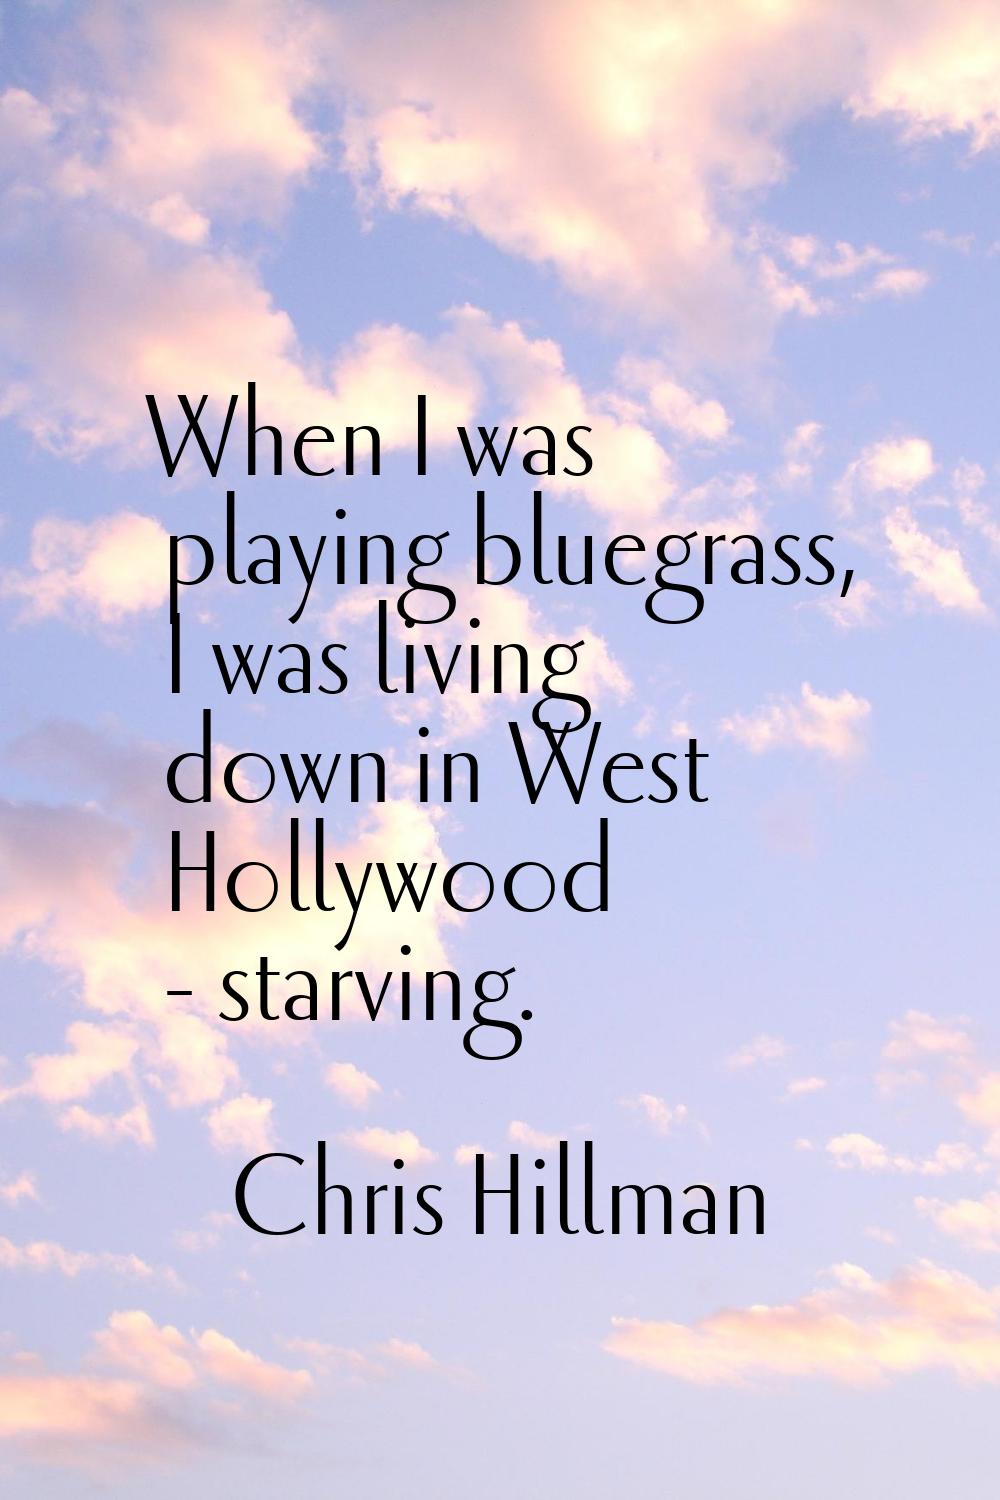 When I was playing bluegrass, I was living down in West Hollywood - starving.